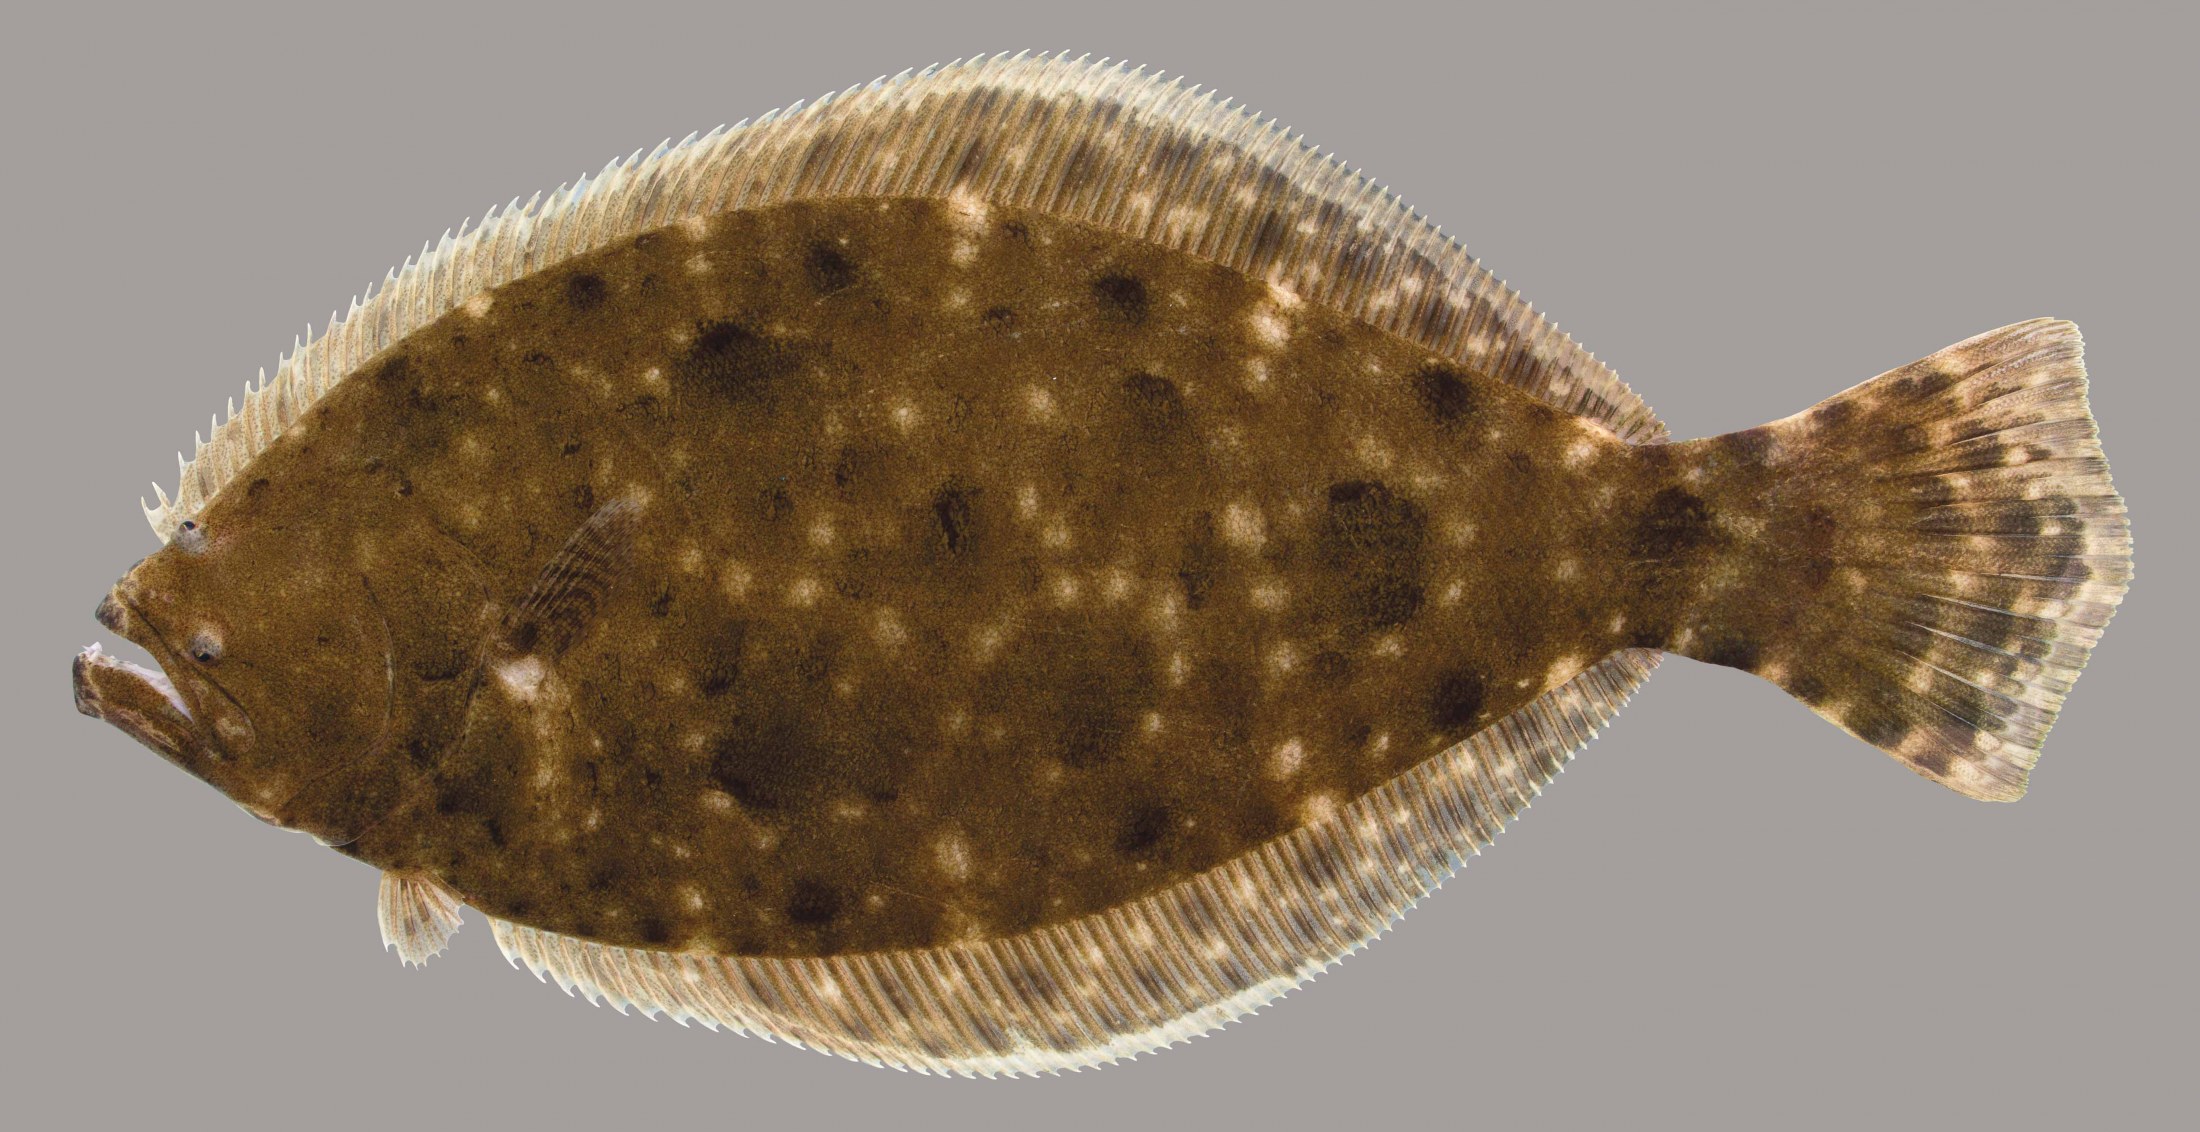 Lateral view of a southern flounder